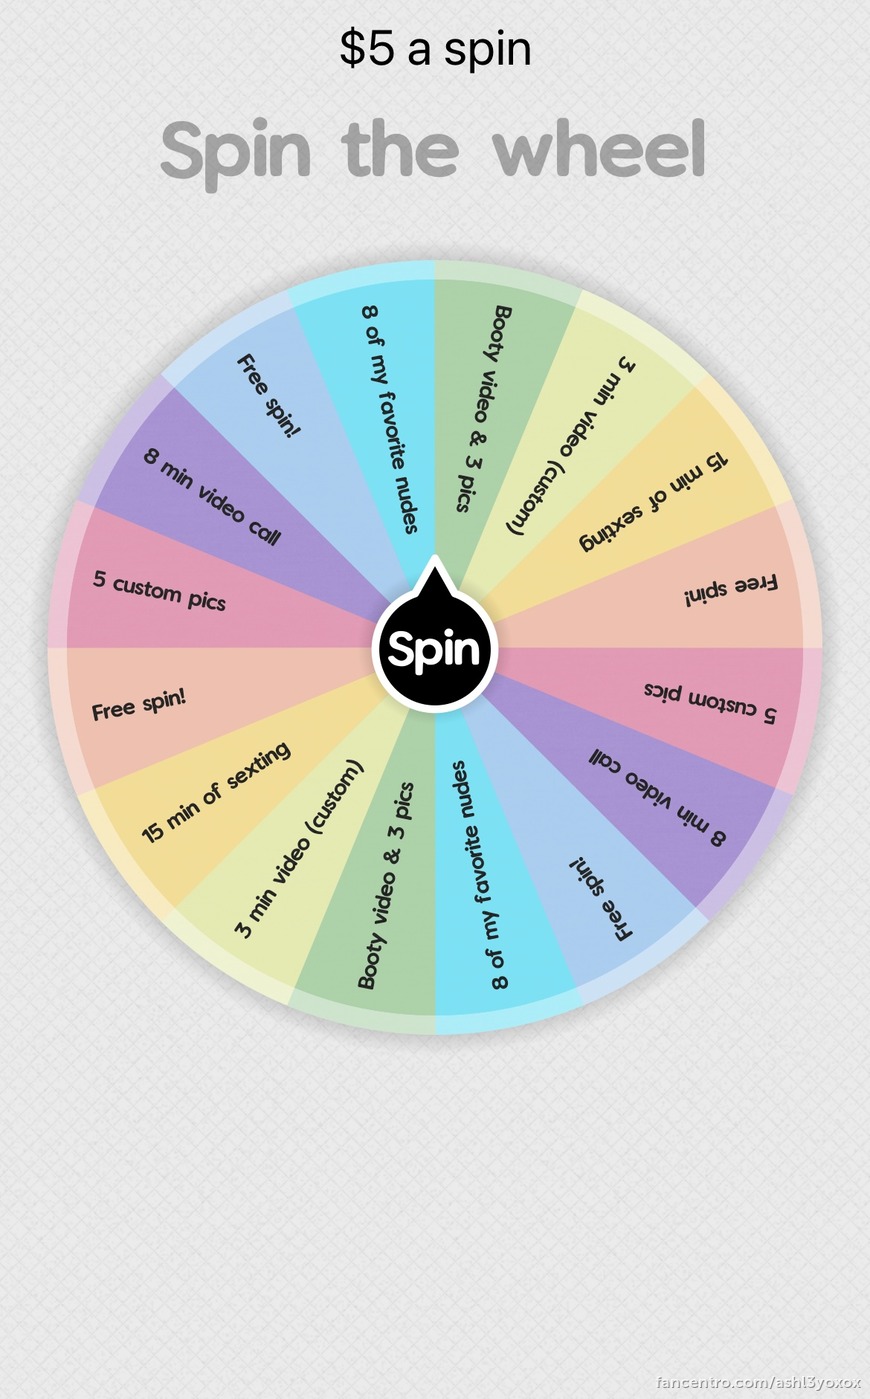 Spin the wheel! - post image